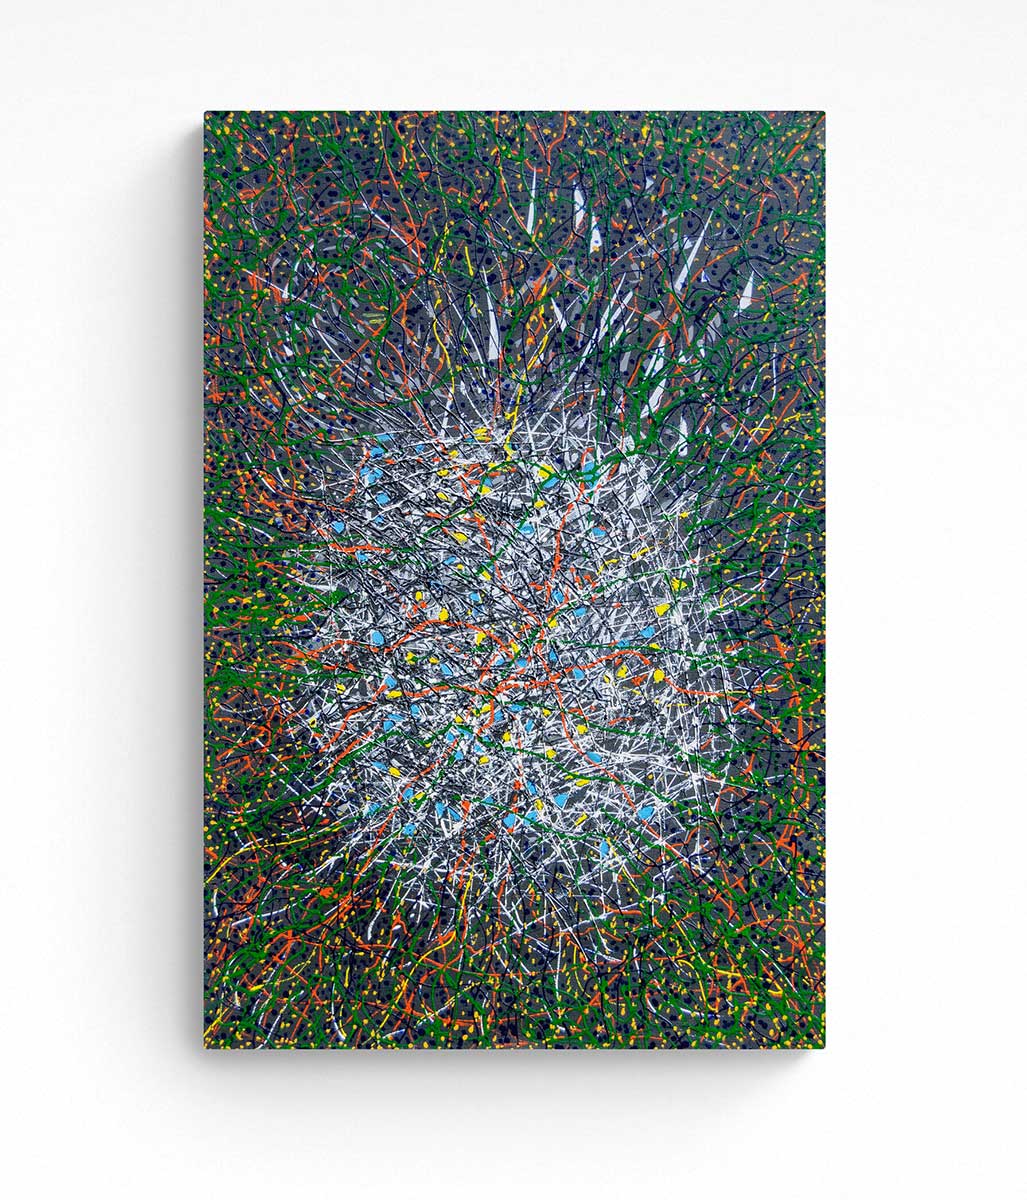 textured abstract painting on canvas of the milkyway in the sky